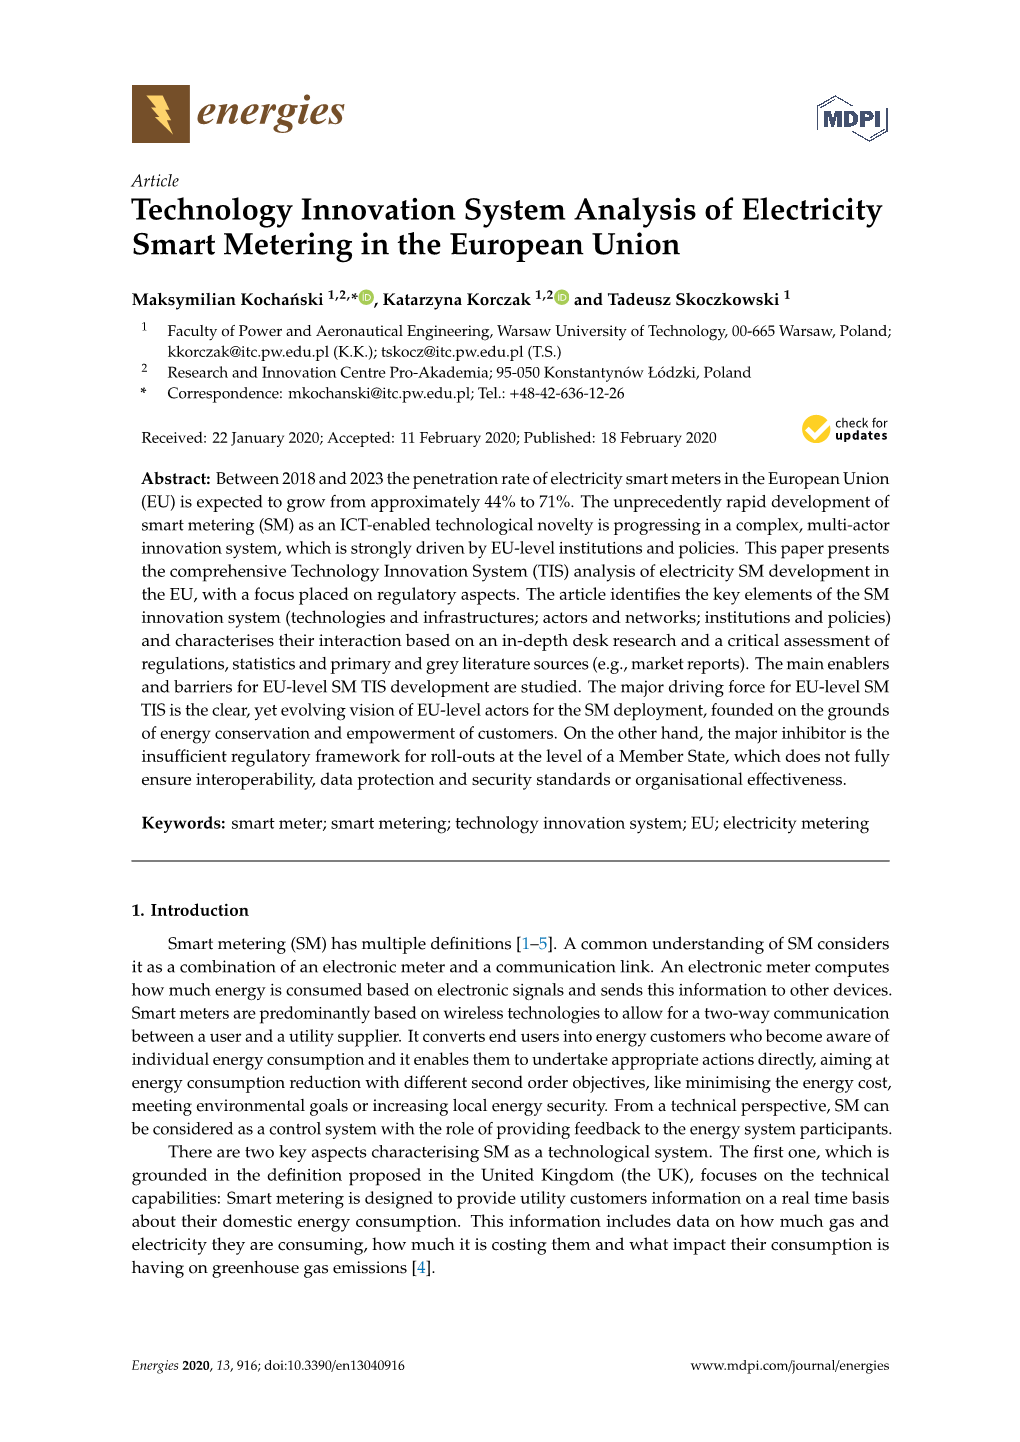 Technology Innovation System Analysis of Electricity Smart Metering in the European Union